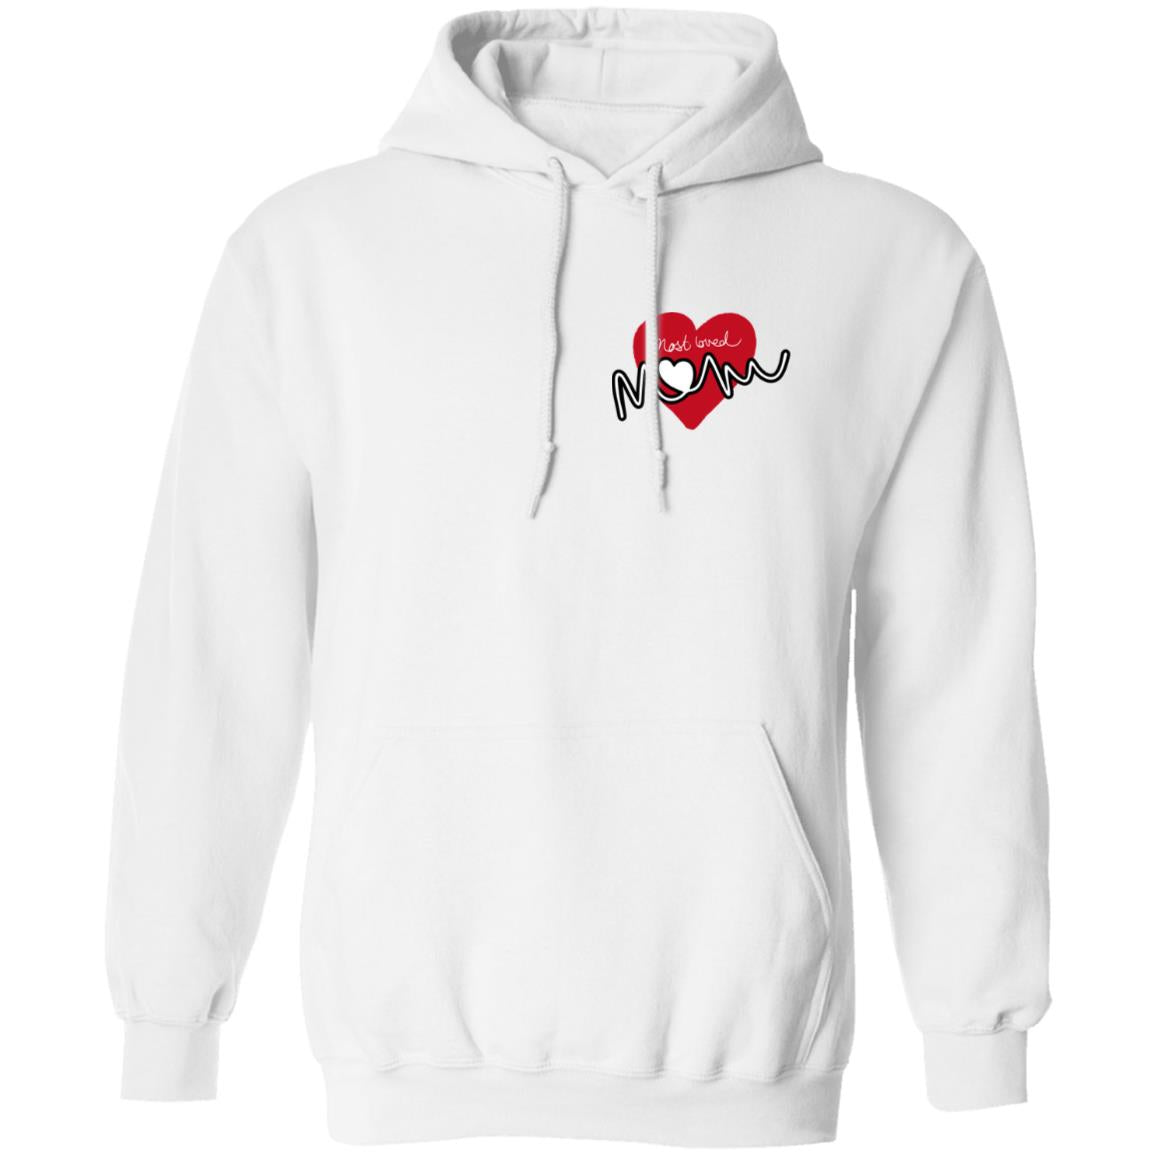 White hoodie with red heart design left chest with "most loved Mom" hand written text featured in front of it.